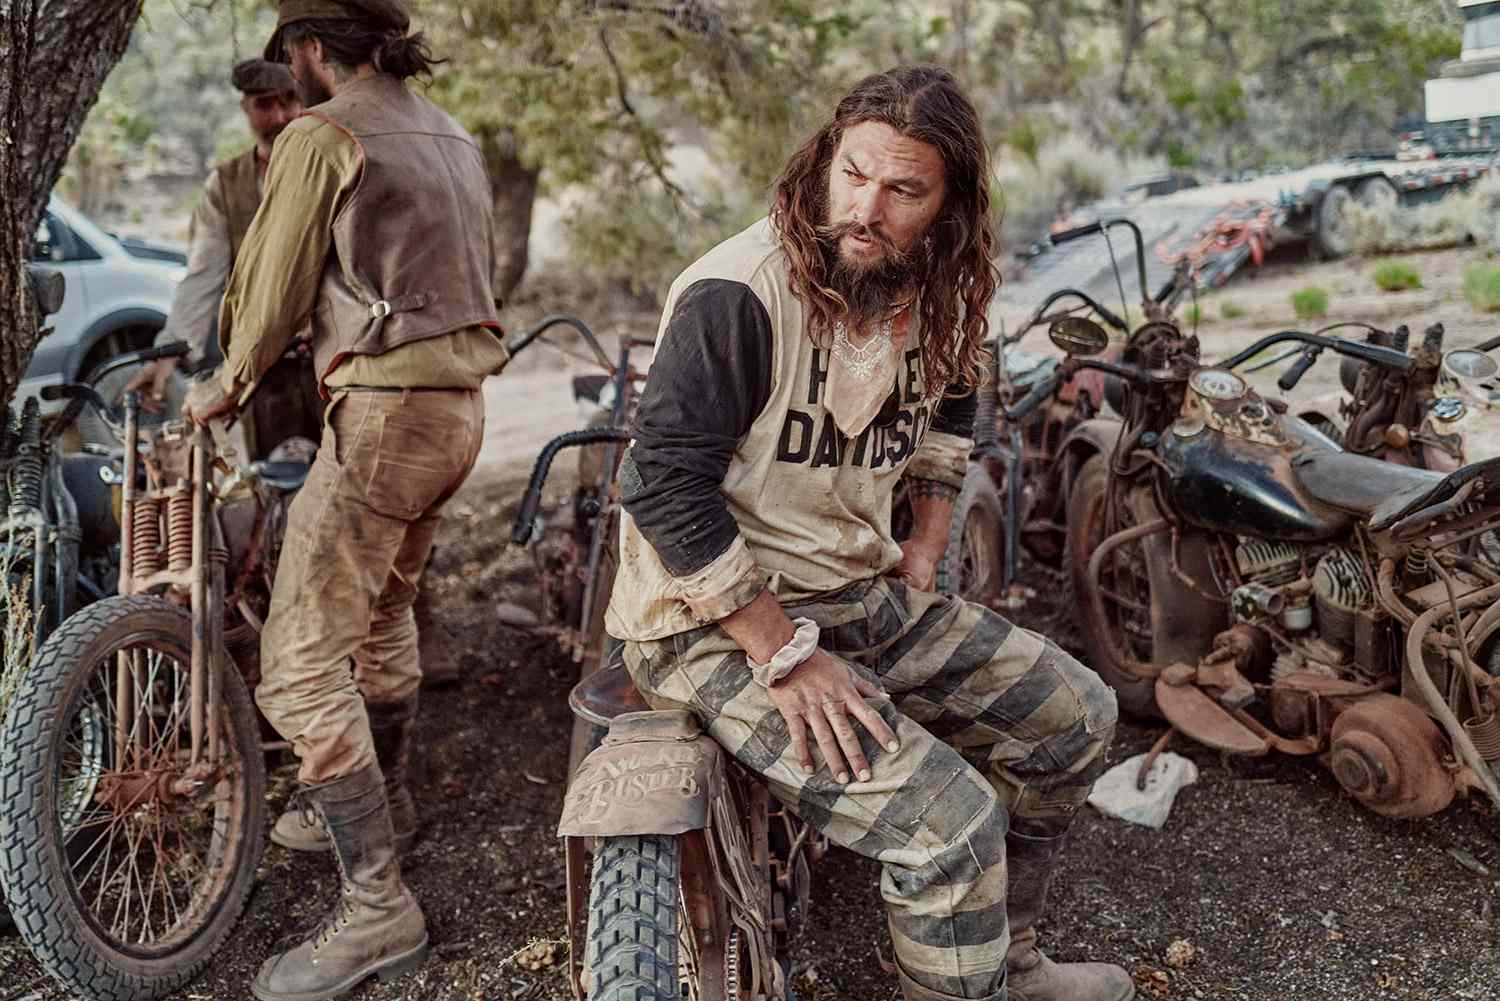 Jason Momoa Goes ON THE ROAM in His New Max Docuseries